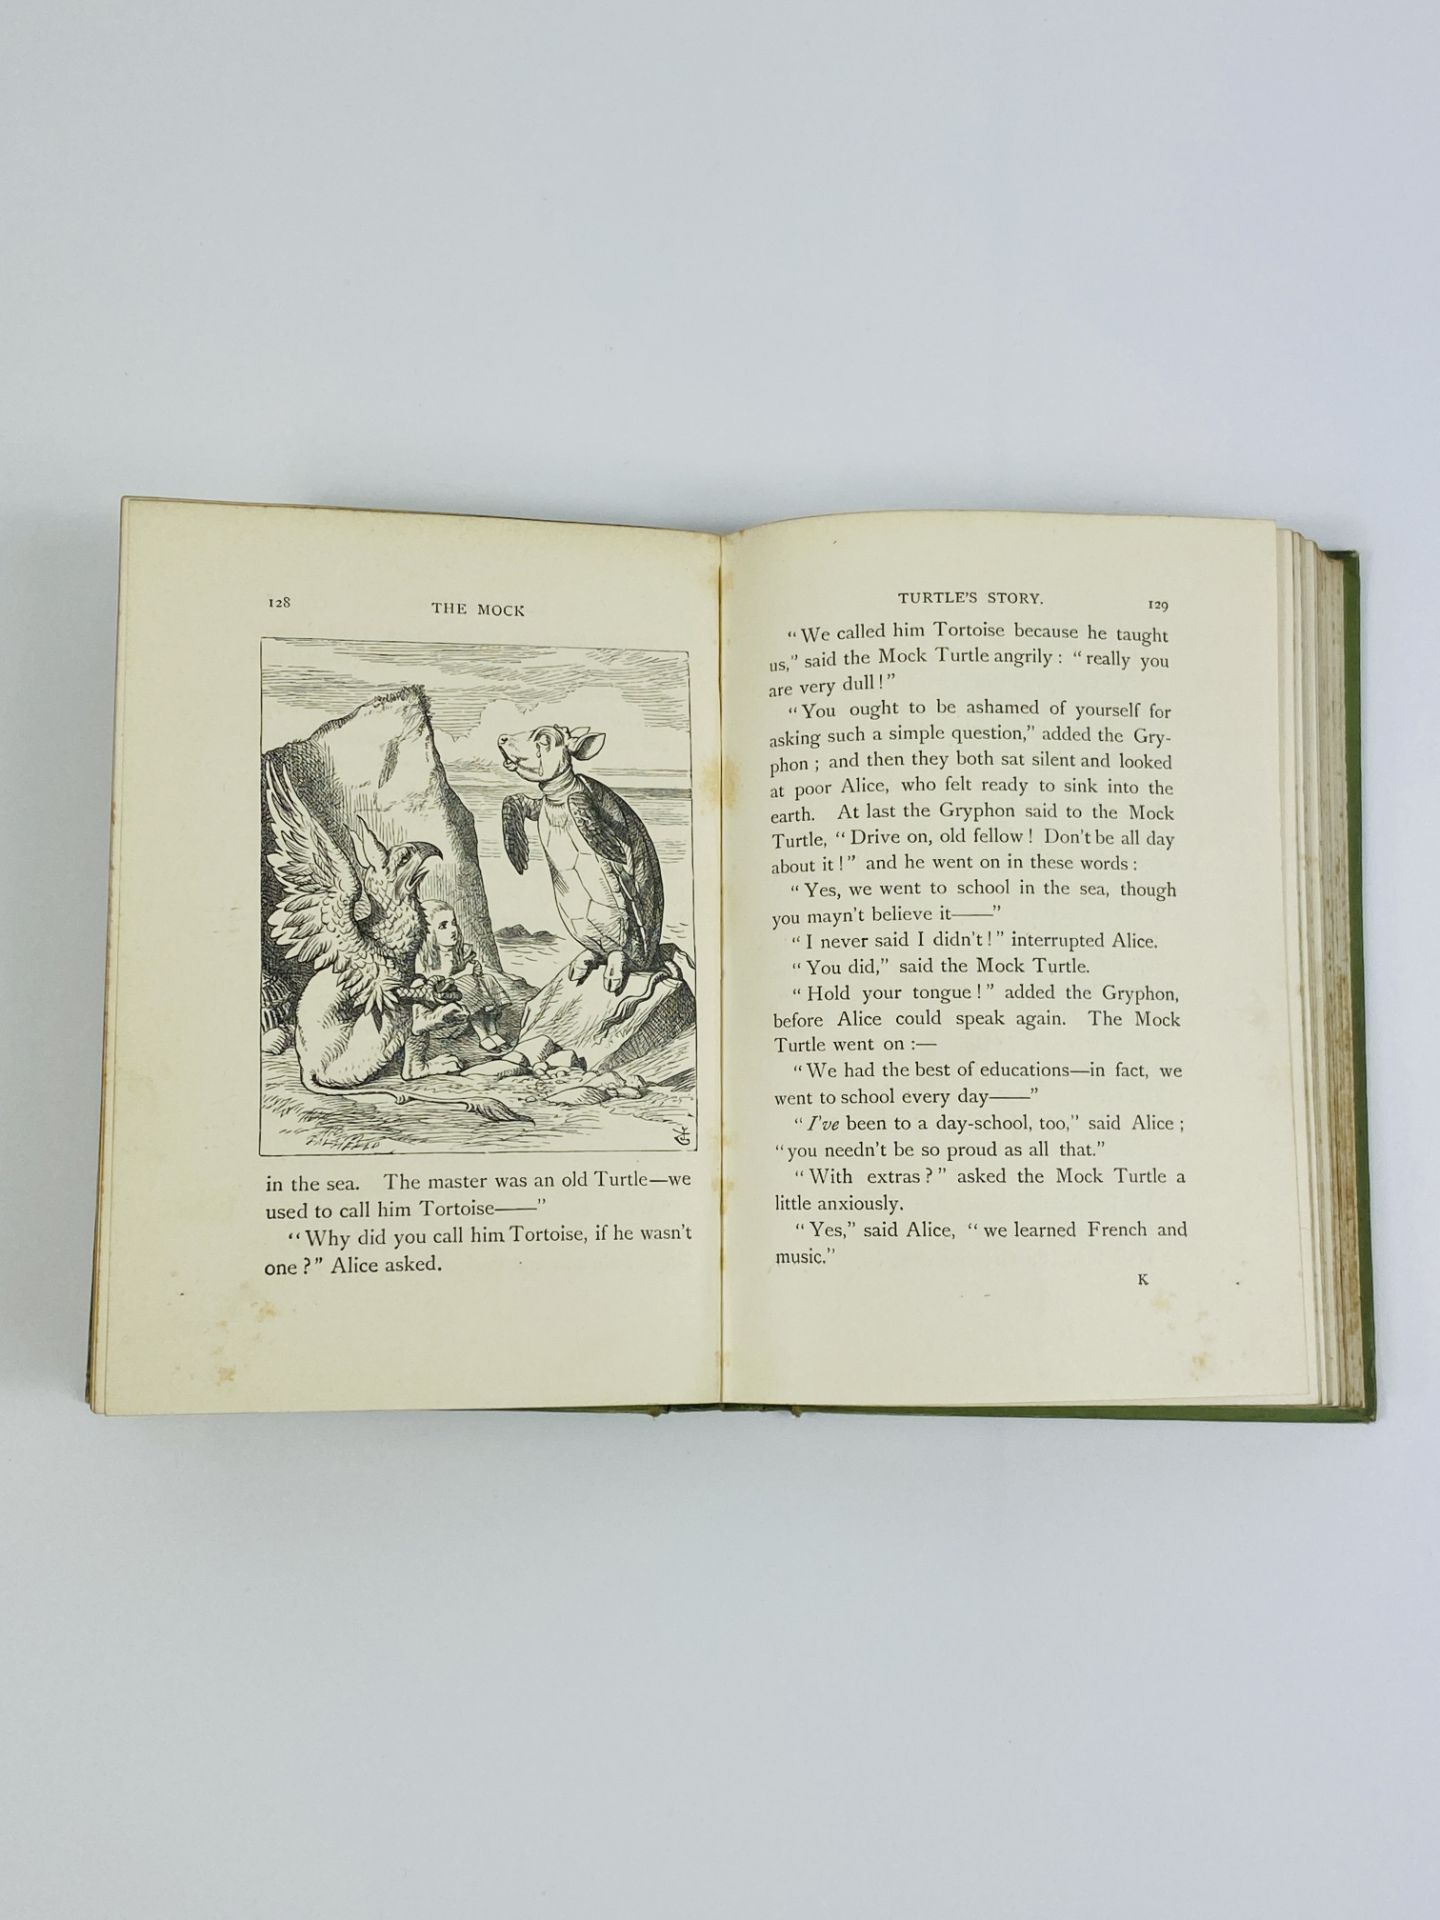 Alice's Adventures in Wonderland, Lewis Carroll, published MacMillan and Co, 1898 - Image 4 of 6